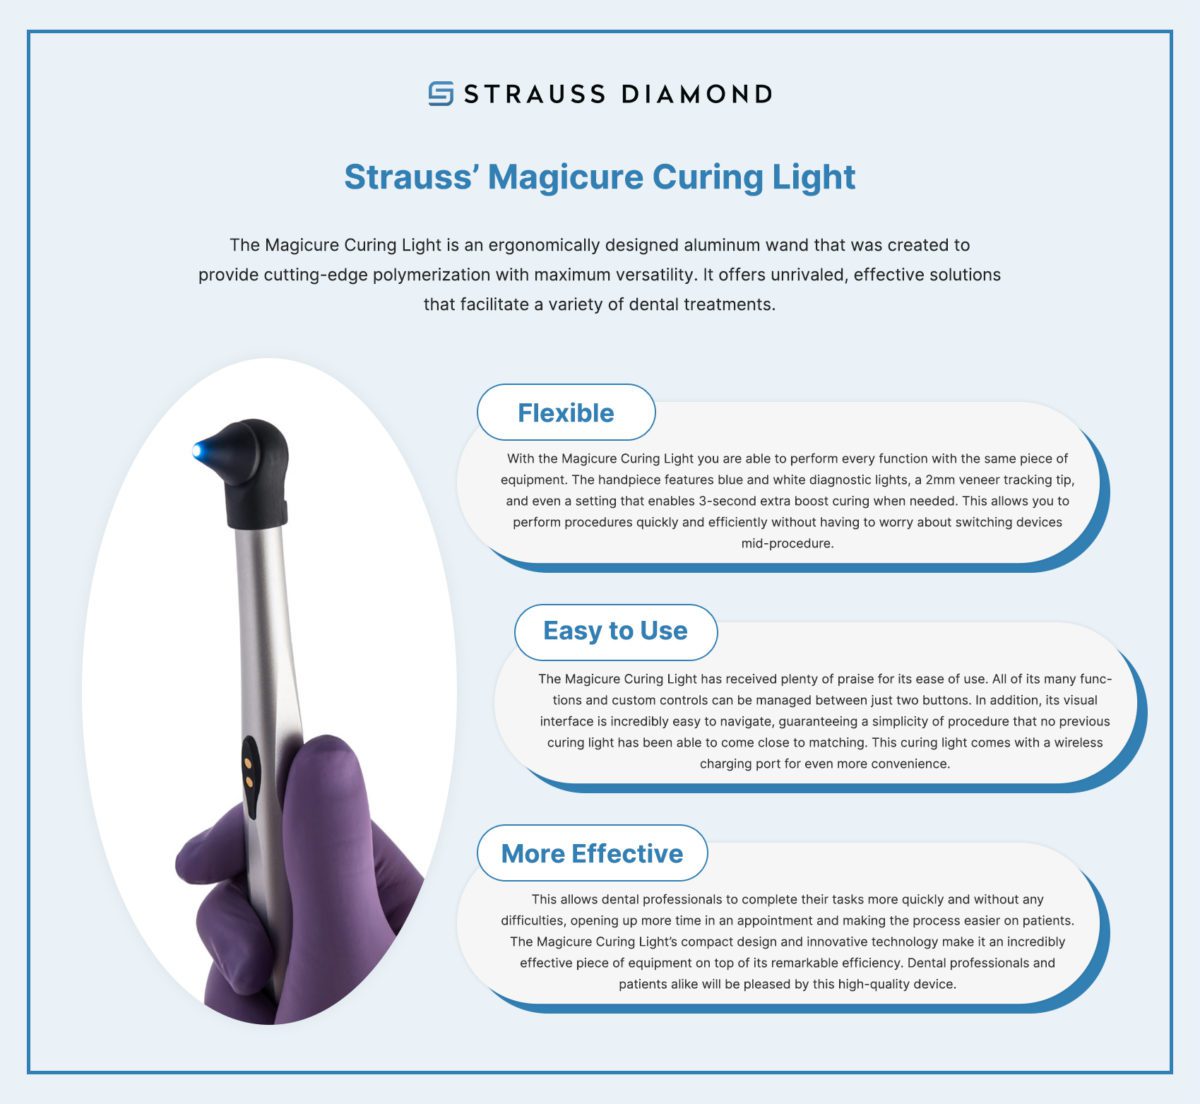 Magicure Curing Light Infographic